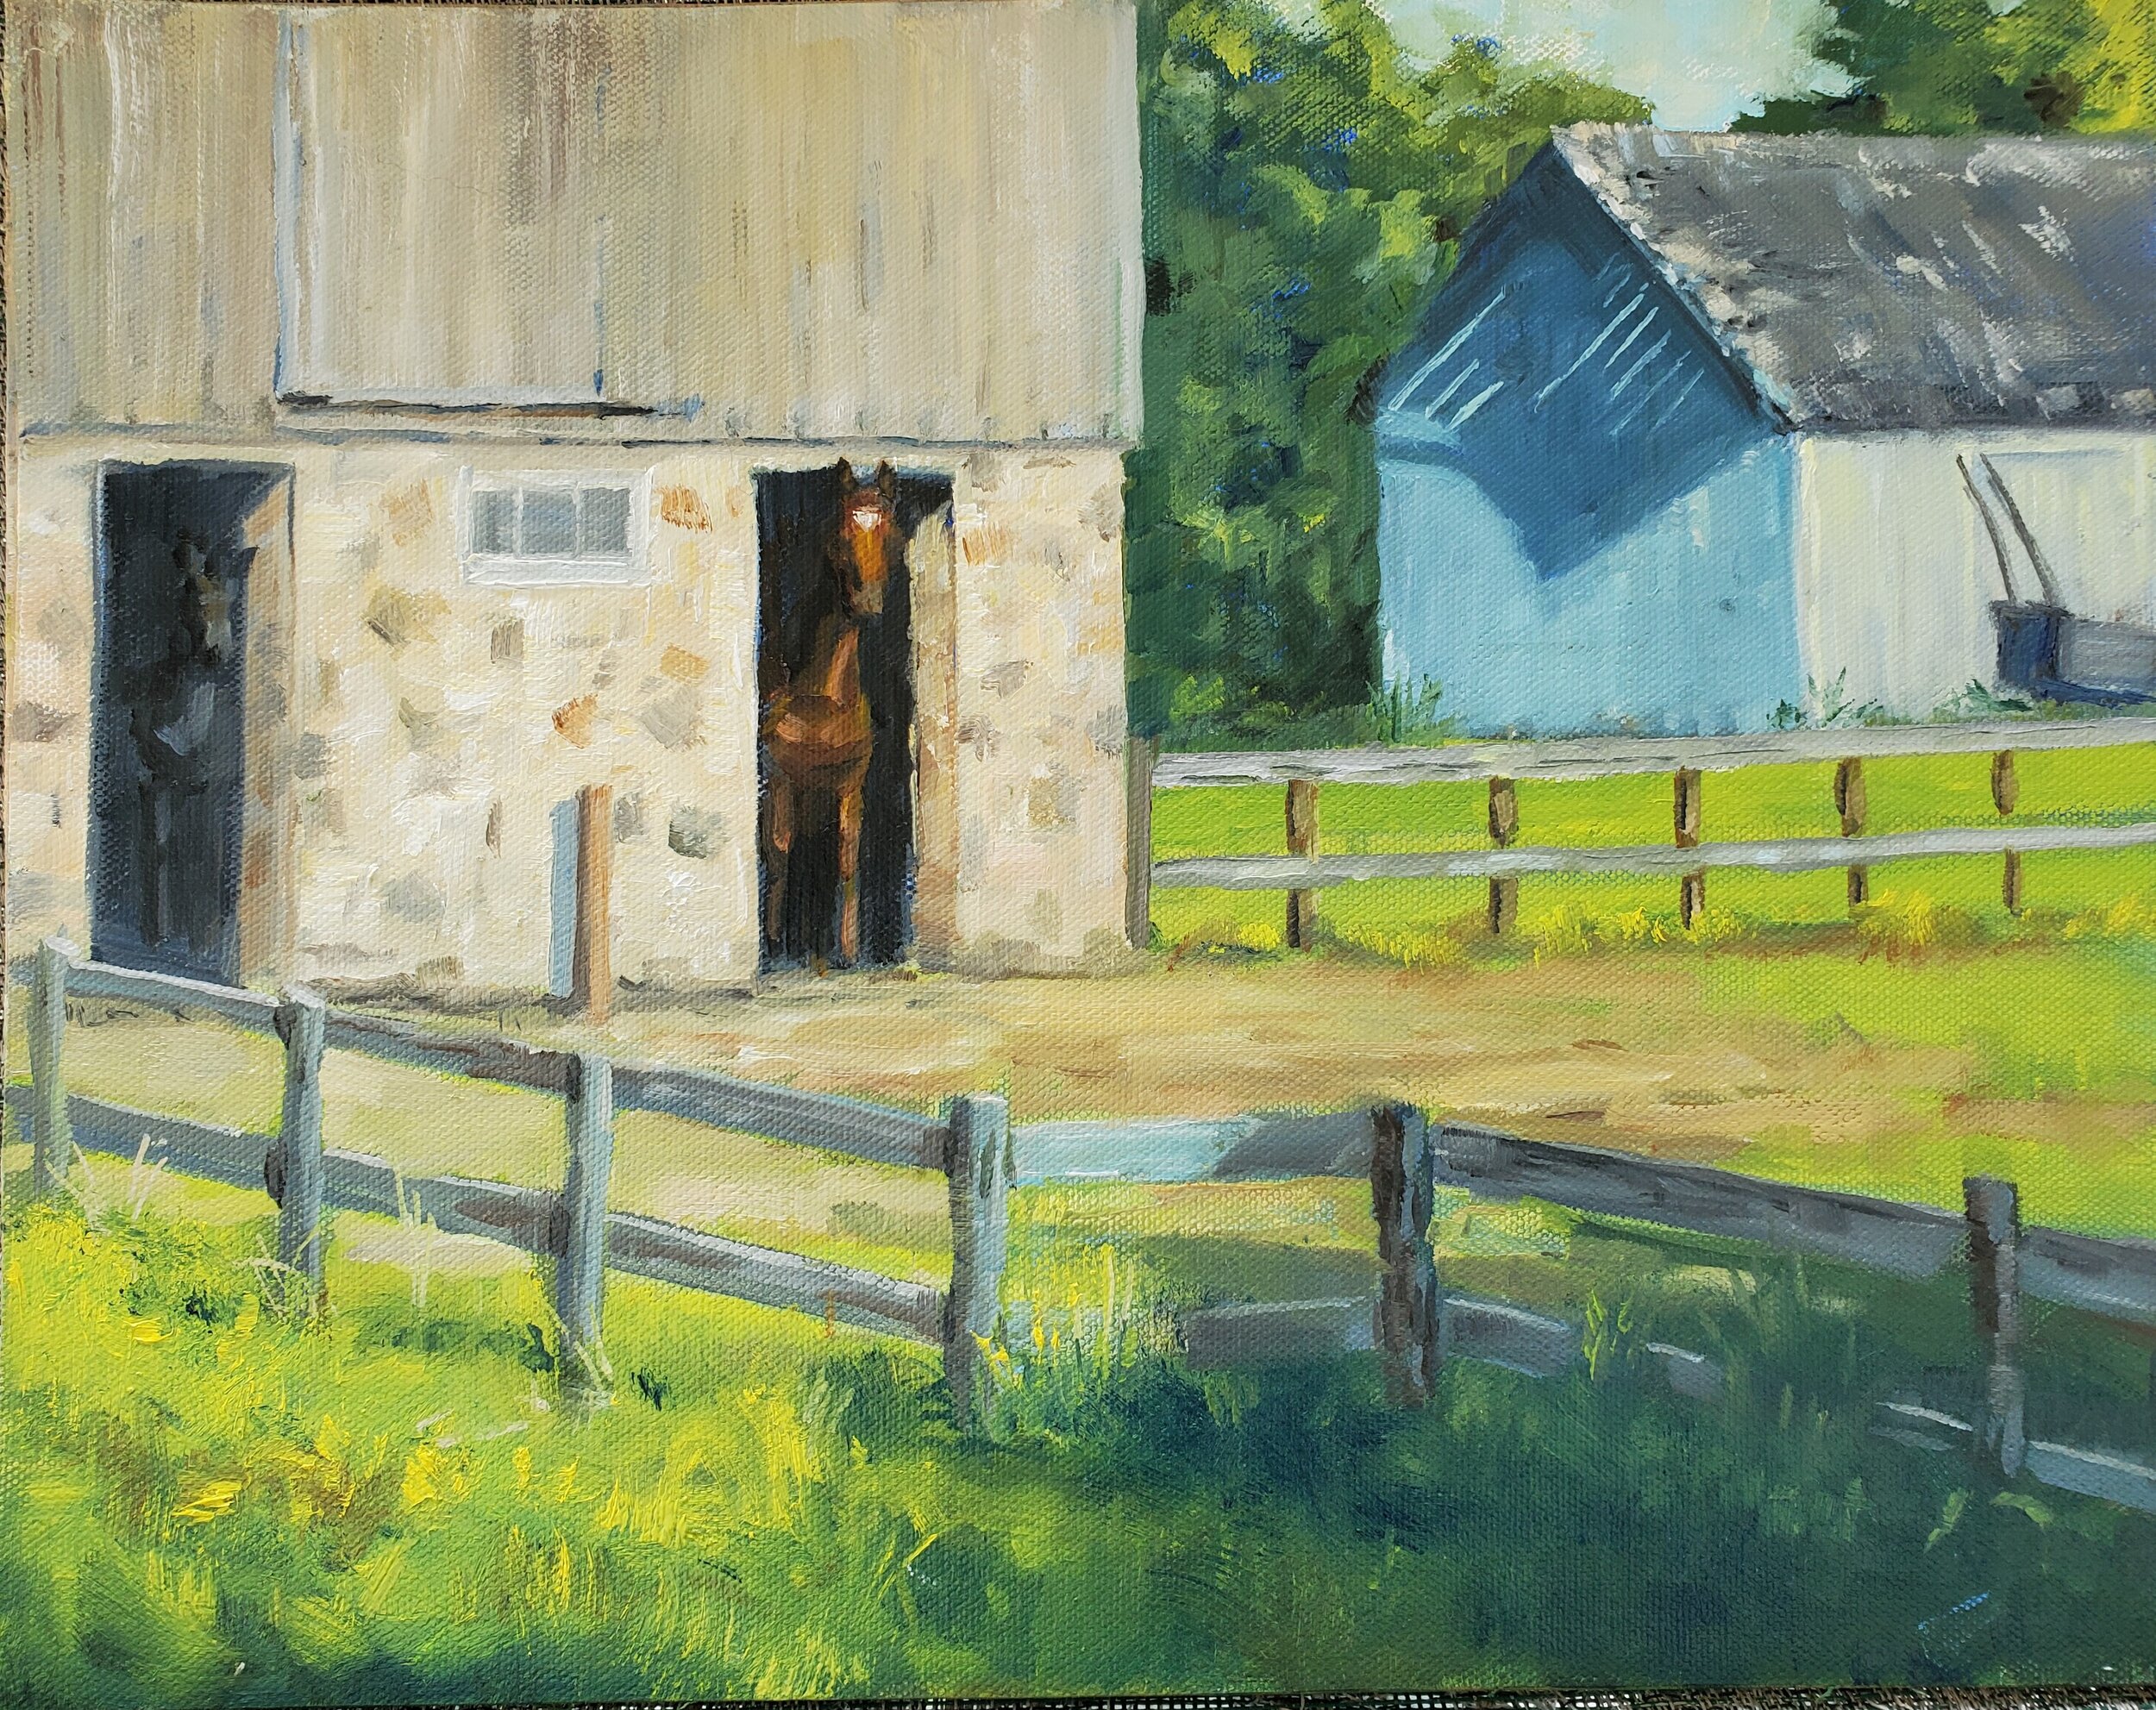 Cooling in the Barn  11x14 Oil